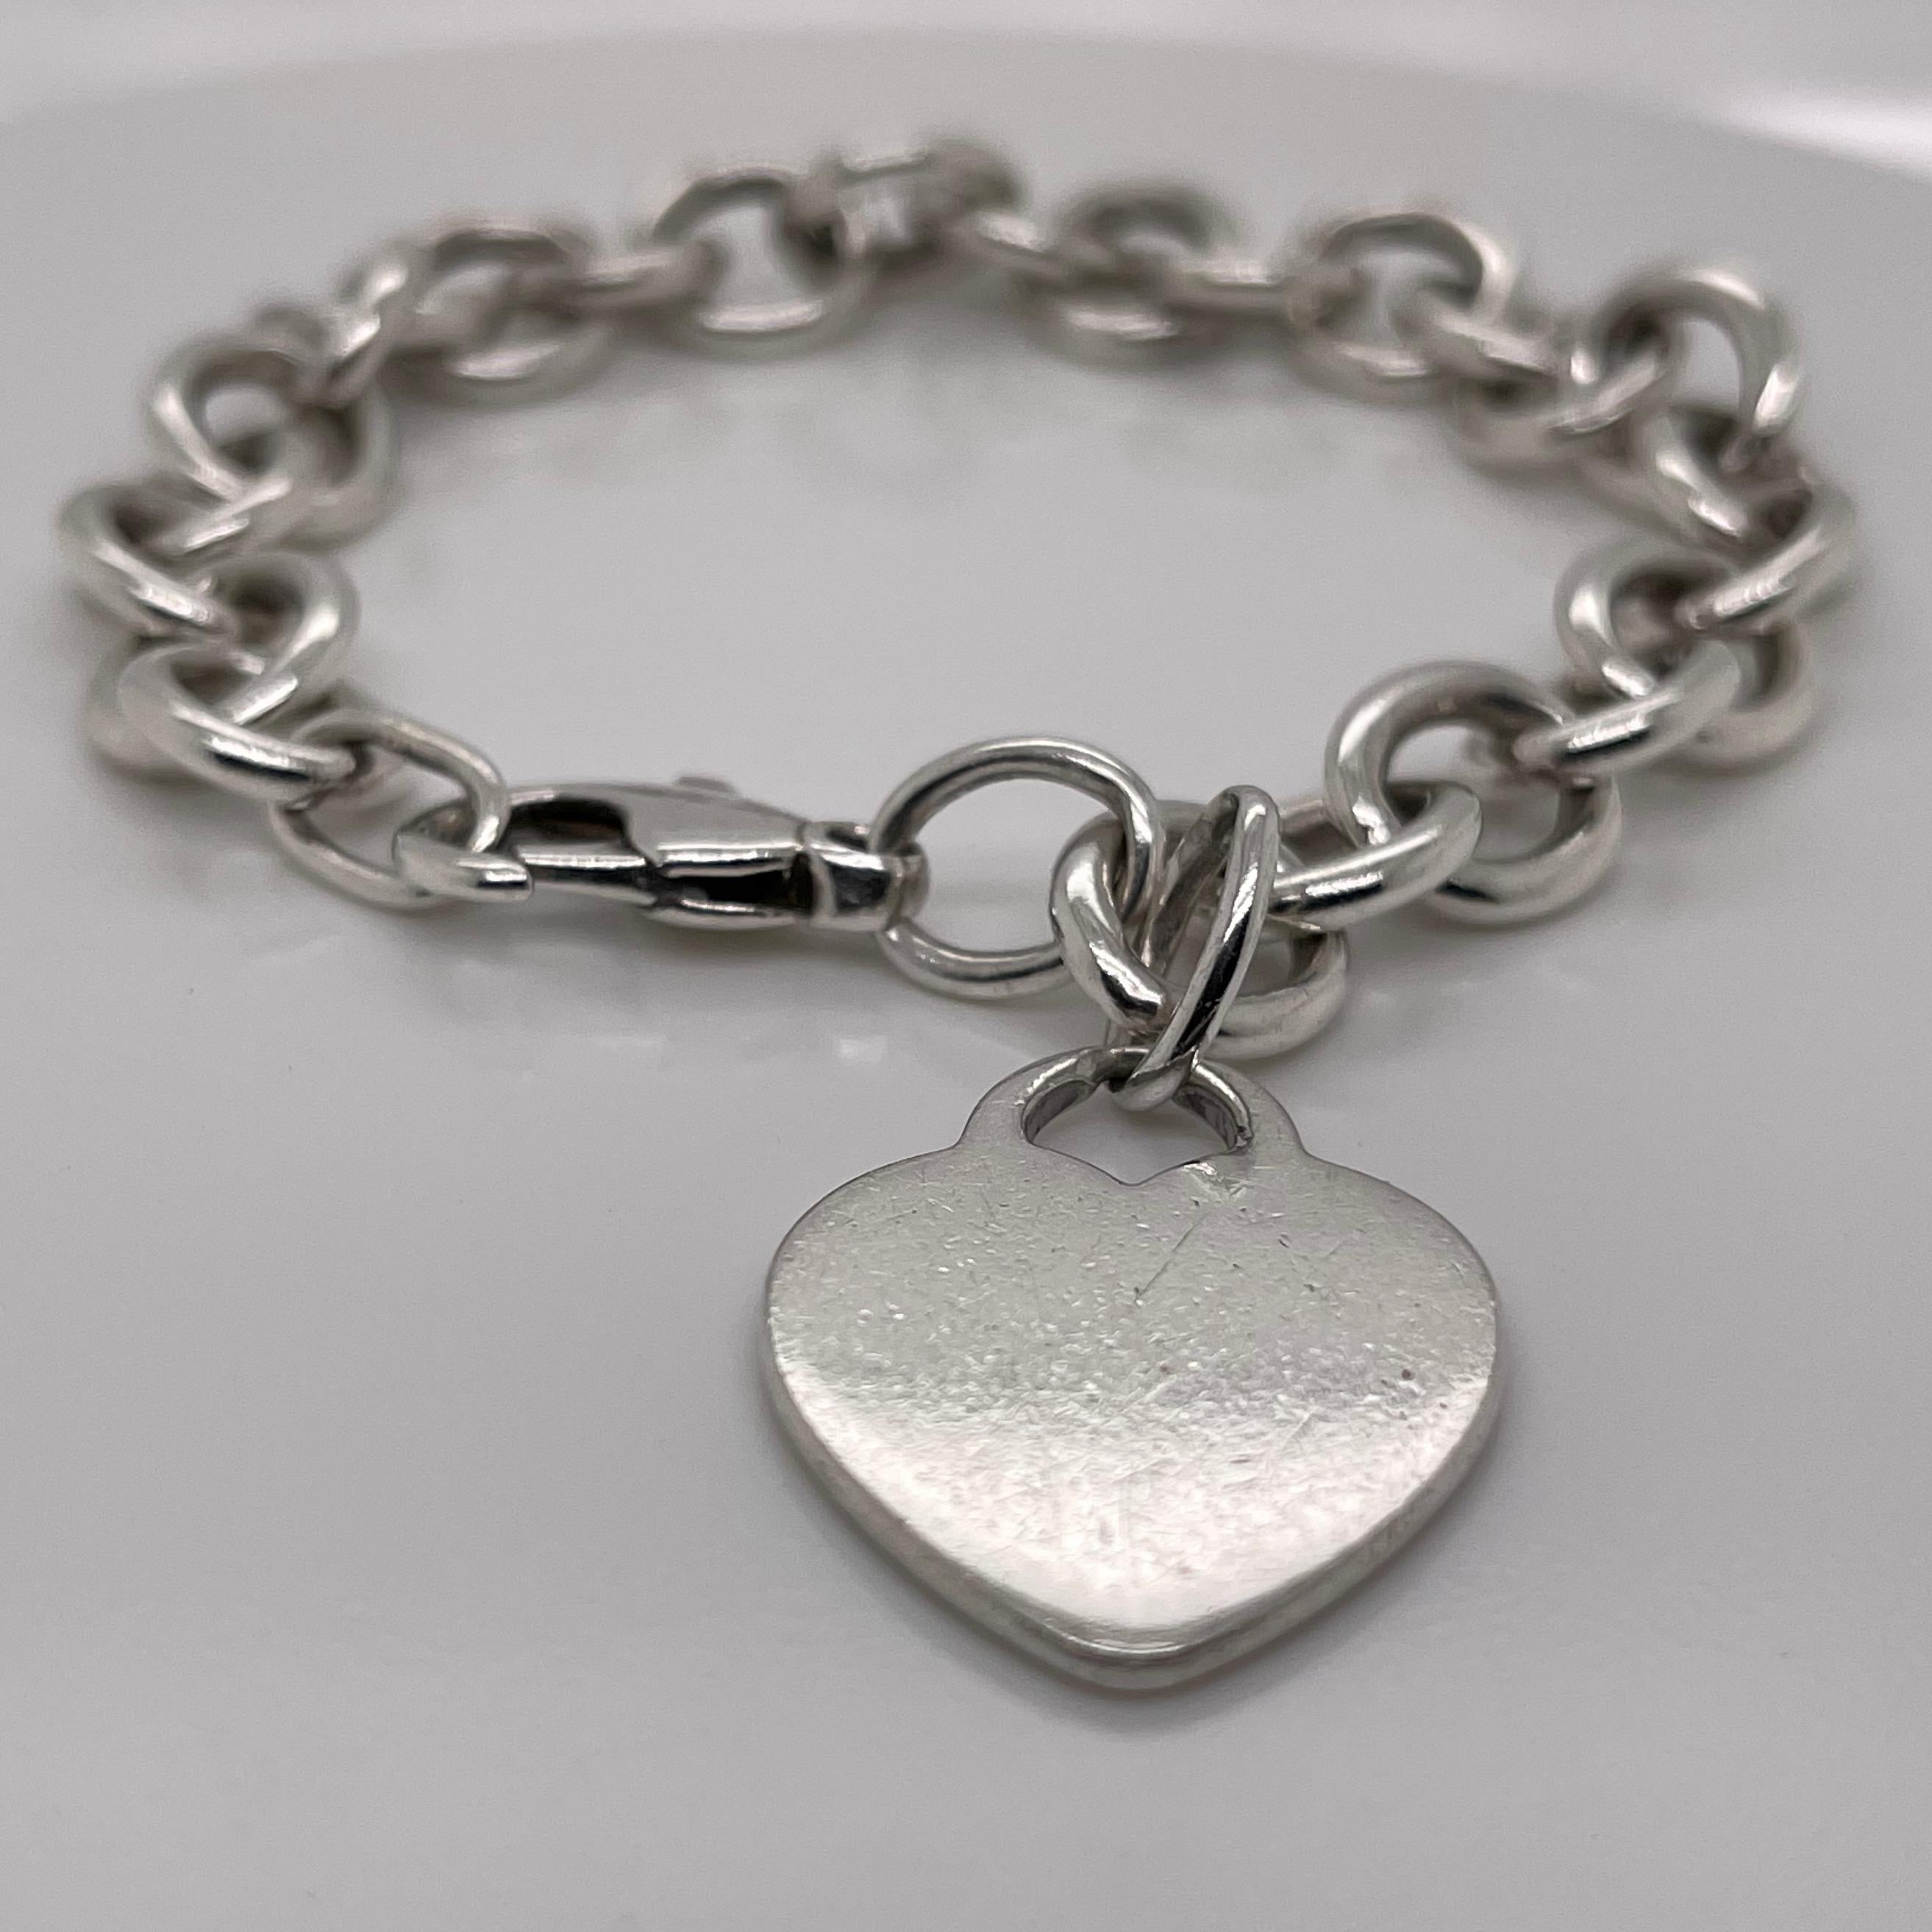 Tiffany & Co. Sterling Silver Dog Chain Link Bracelet and Heart Pendant In Good Condition For Sale In Philadelphia, PA